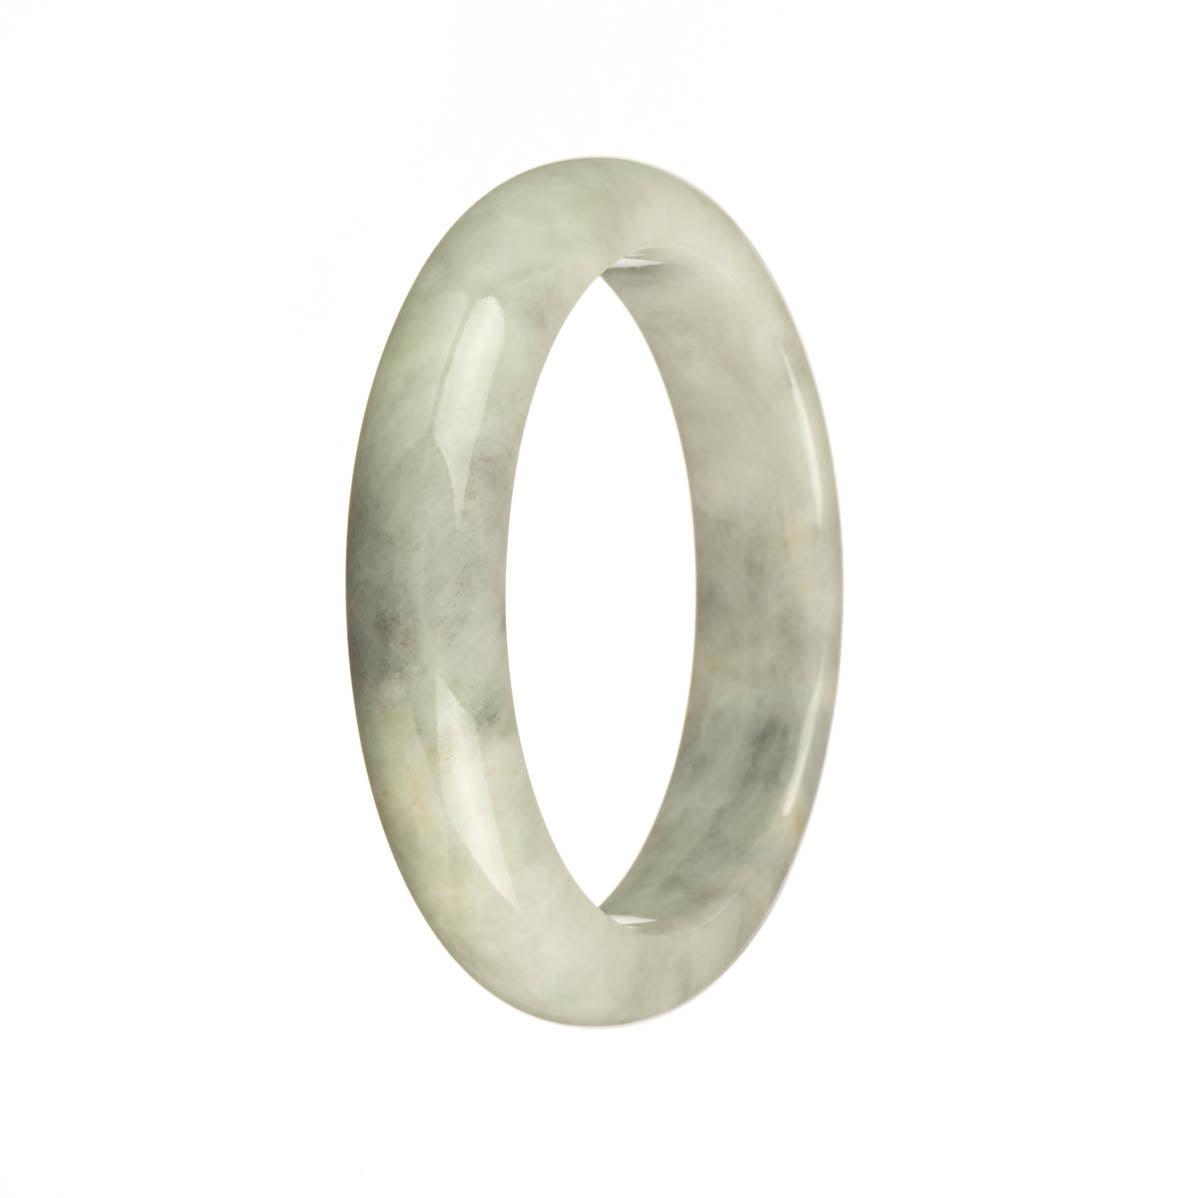 A grey pattern traditional jade bangle bracelet with a half moon shape, measuring 54mm. Certified as untreated.